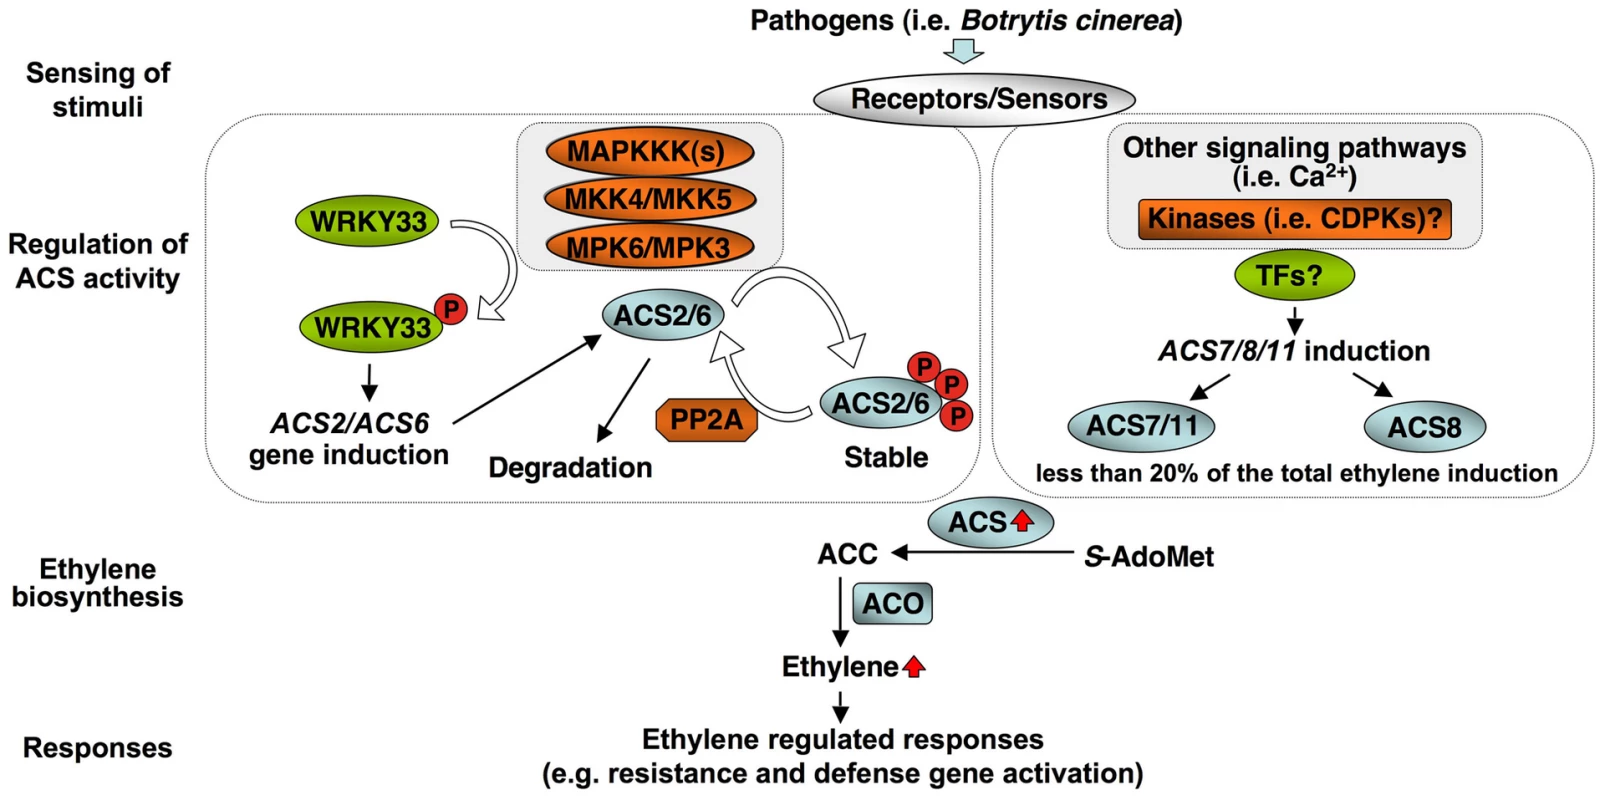 A model depicting the dual-level regulation of ACS activity by MPK3/MPK6-dependent and independent pathways during pathogen-induced ethylene production.